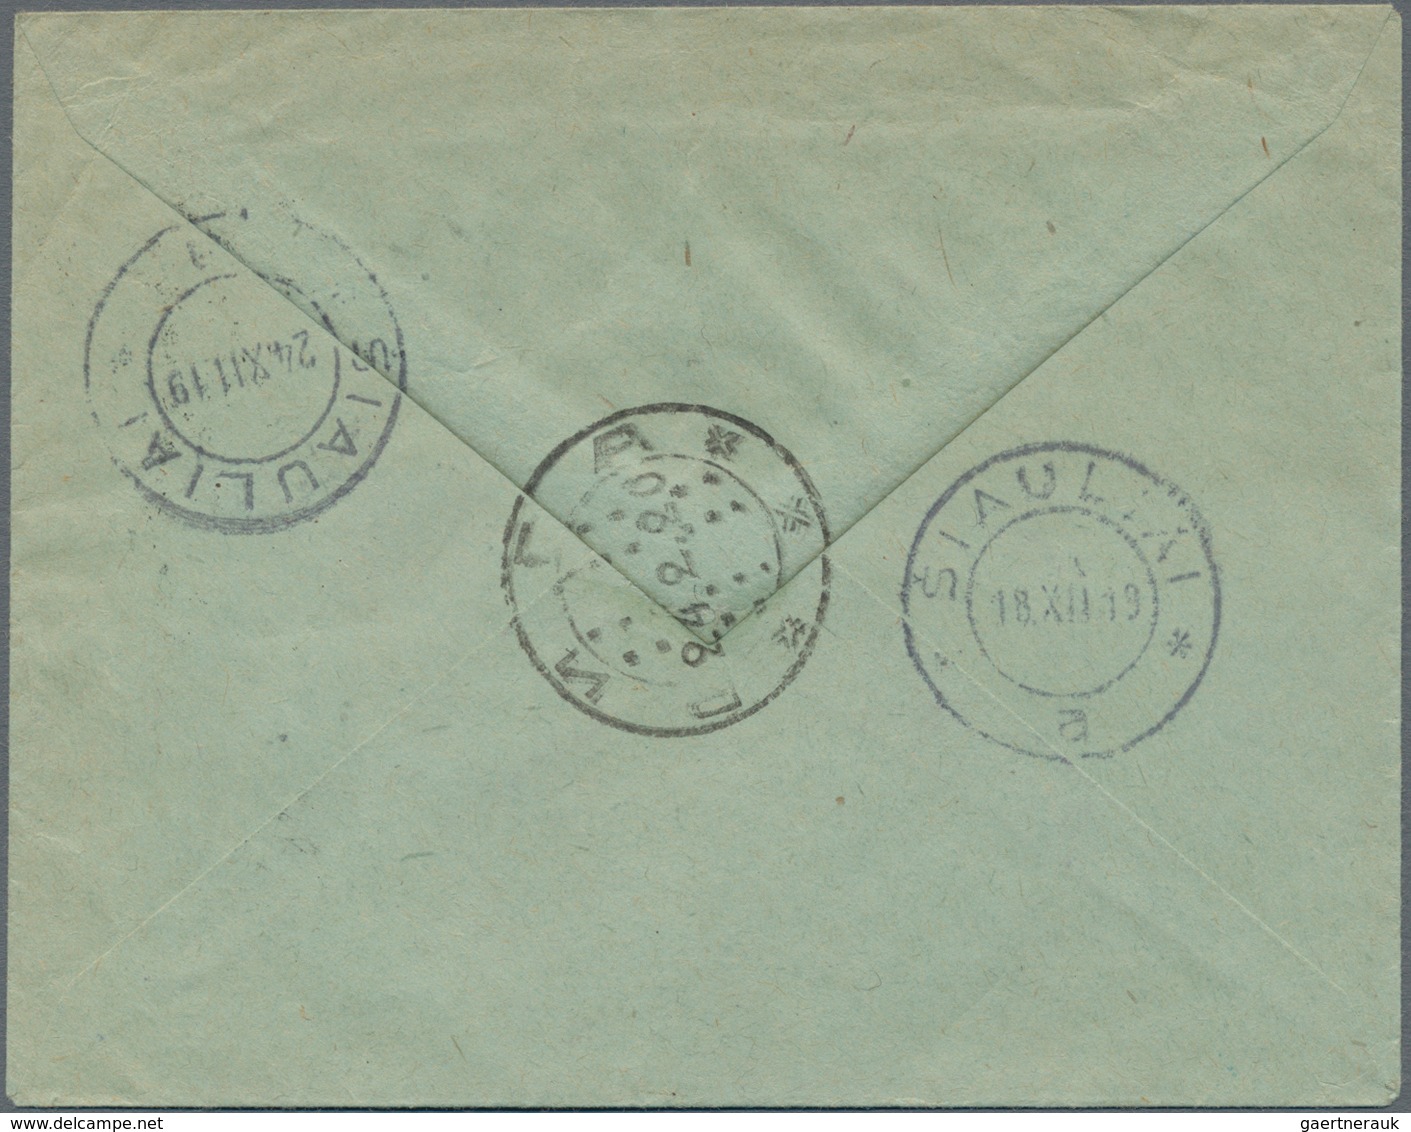 Lettland: 1919, Two Returned Letters RIGA-WILNA And RIGA-SCHAULEN (Lithuania). Both Letters Returned - Letland